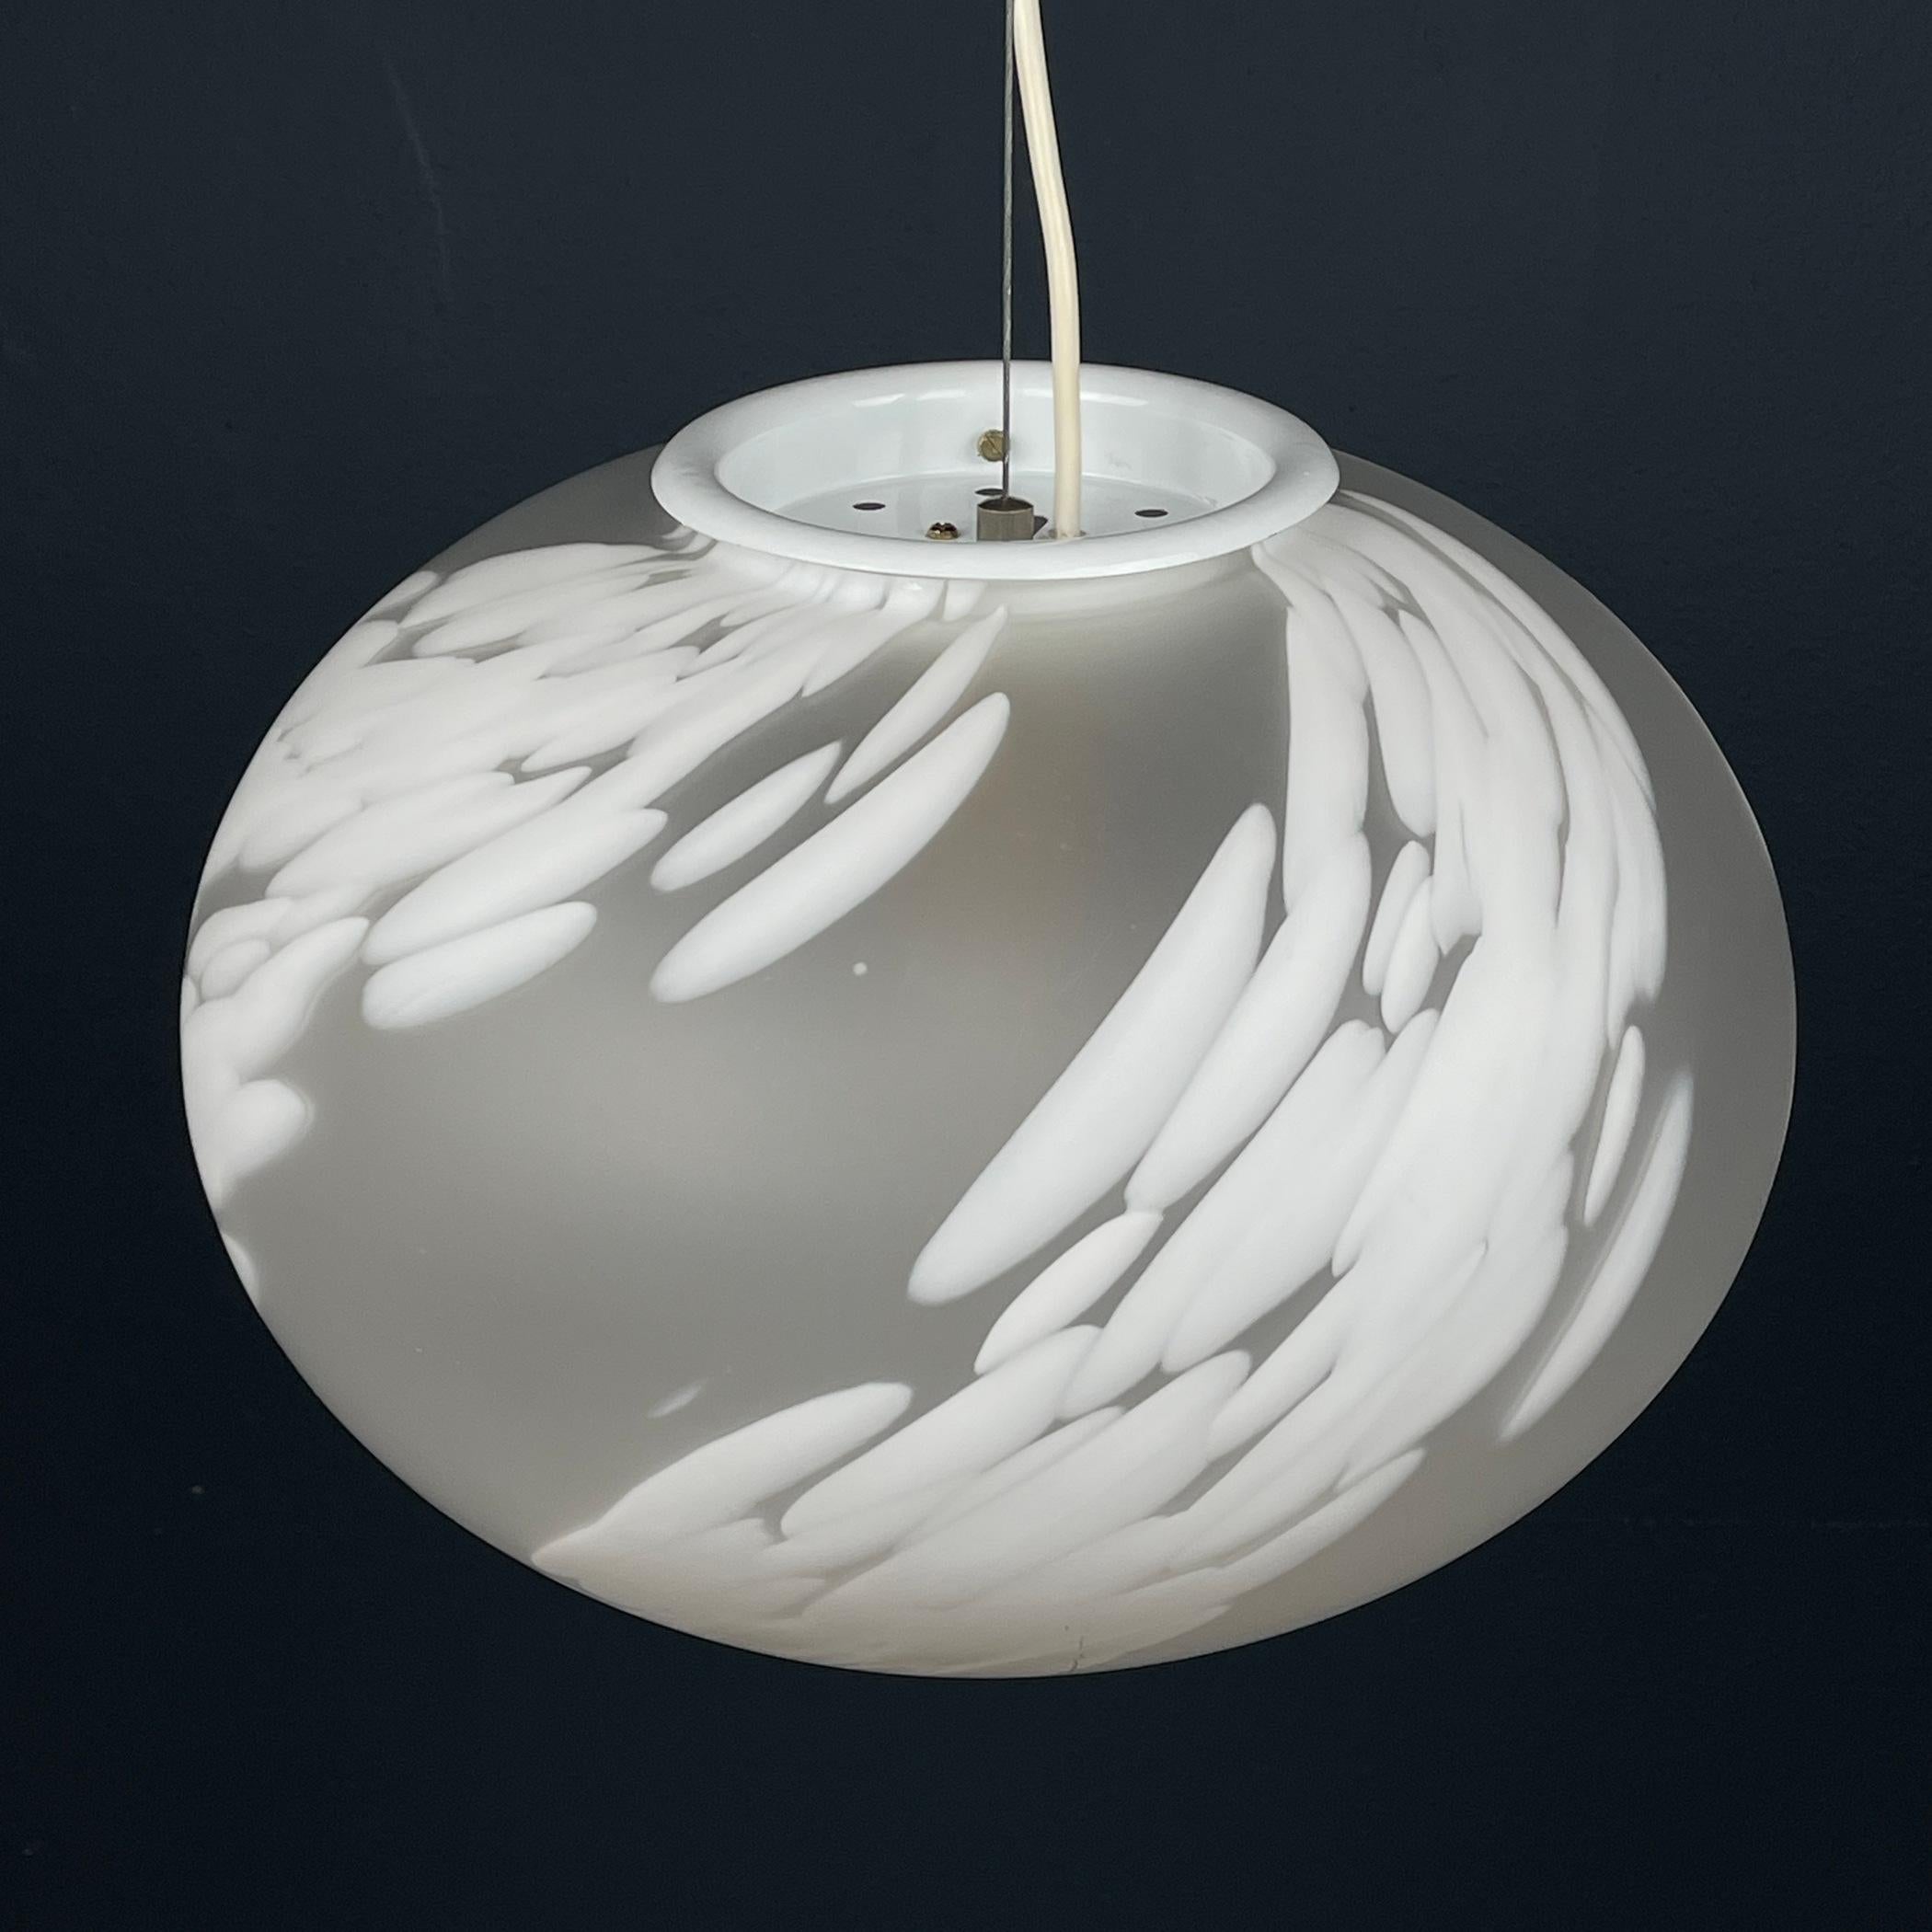 Introducing this exquisite vintage swirl Murano lamp, crafted by Vetri Murano in Italy during the 1970s. Its stunning design features delicate white glass with enchanting spots of white 